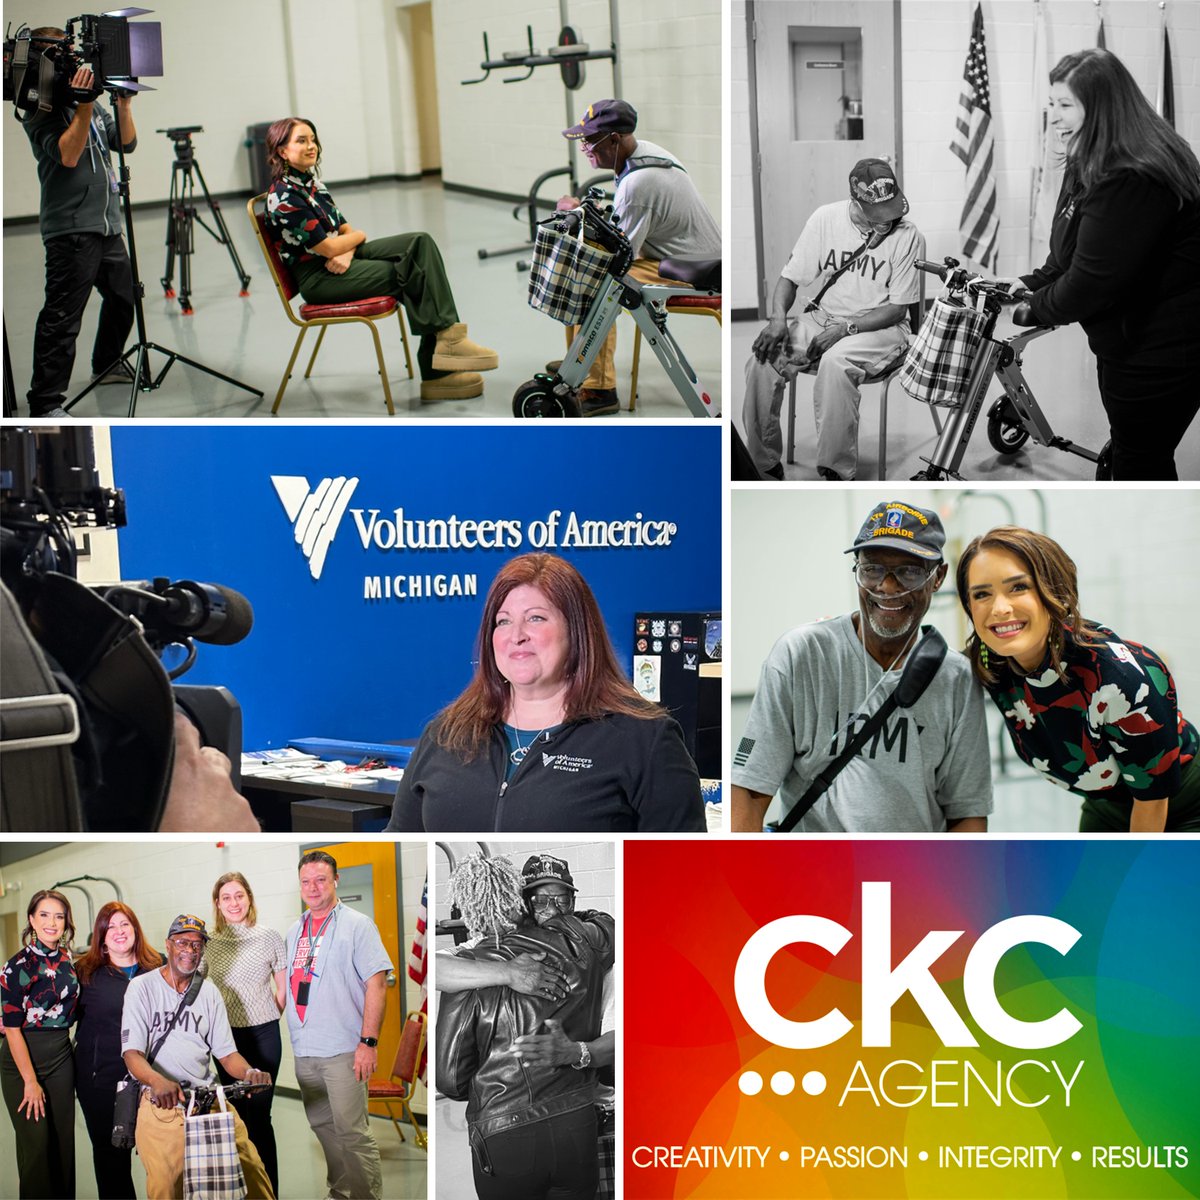 Client news! #CKCAgency worked with @FOX2News’ @EricaOnAir to show Detroiters the real-life impact Volunteers of America Michigan makes in the lives of local veterans (like Kenneth), seniors & families. fox2detroit.com/video/1445141 #PR #publicity